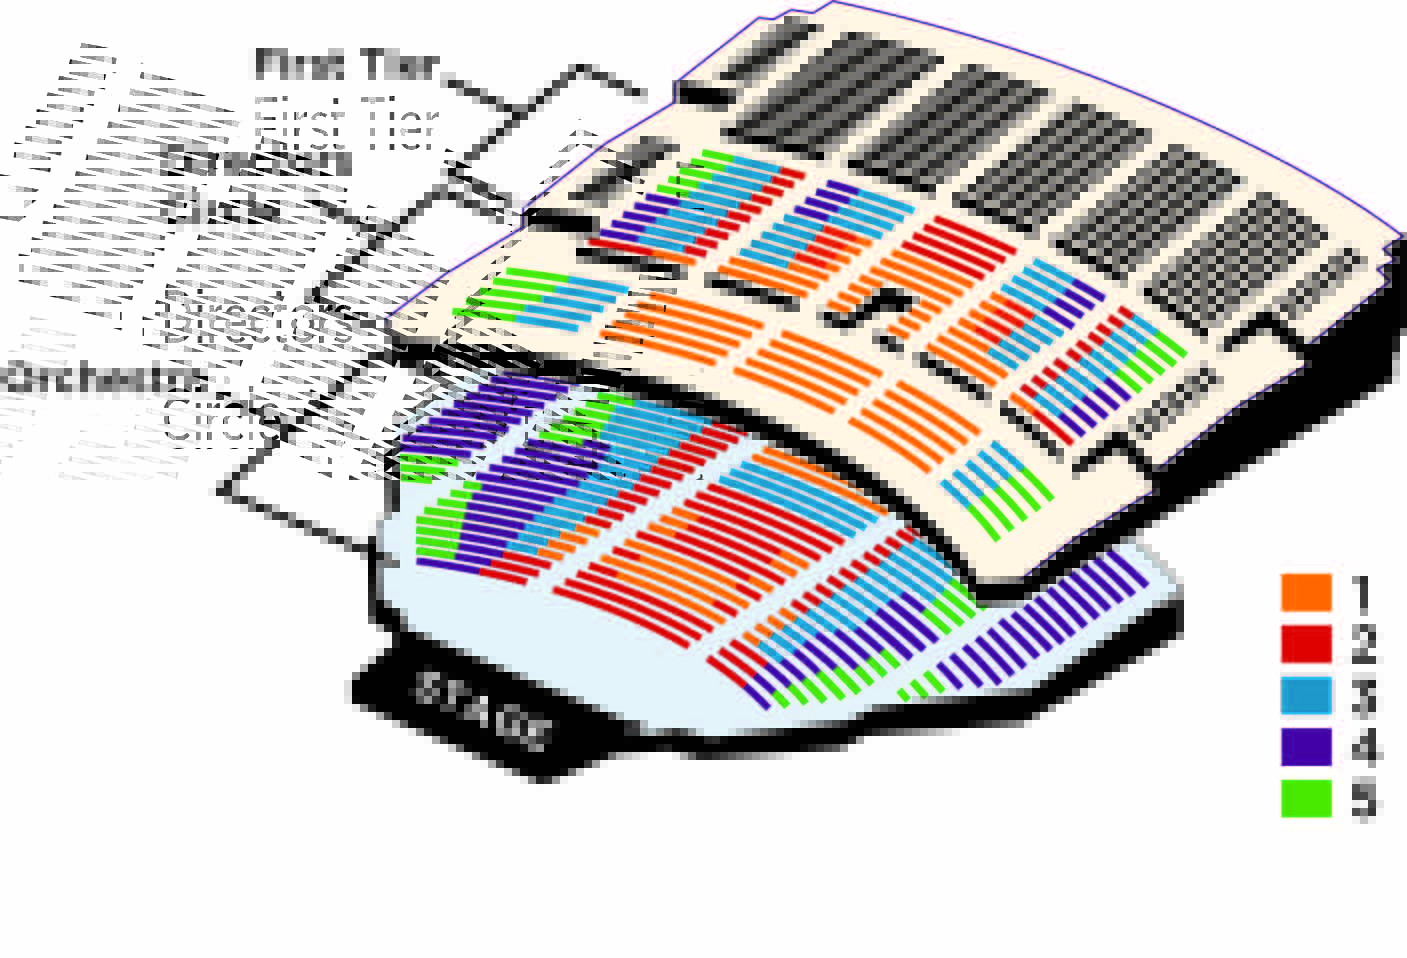 Seating Chart For The Benedum In Pittsburgh